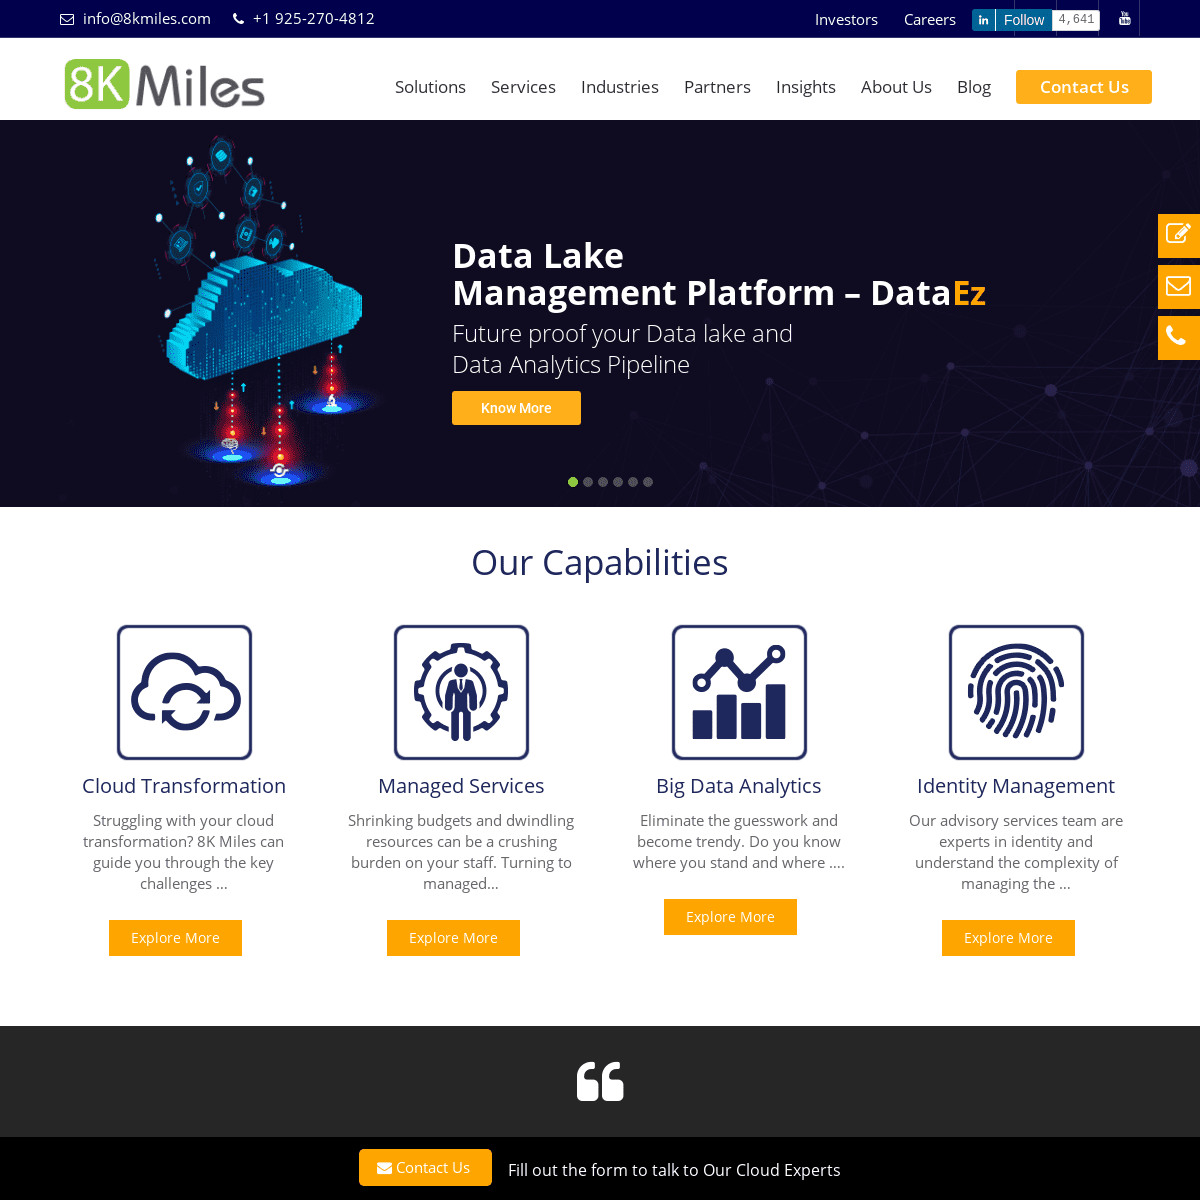 A complete backup of 8kmiles.com